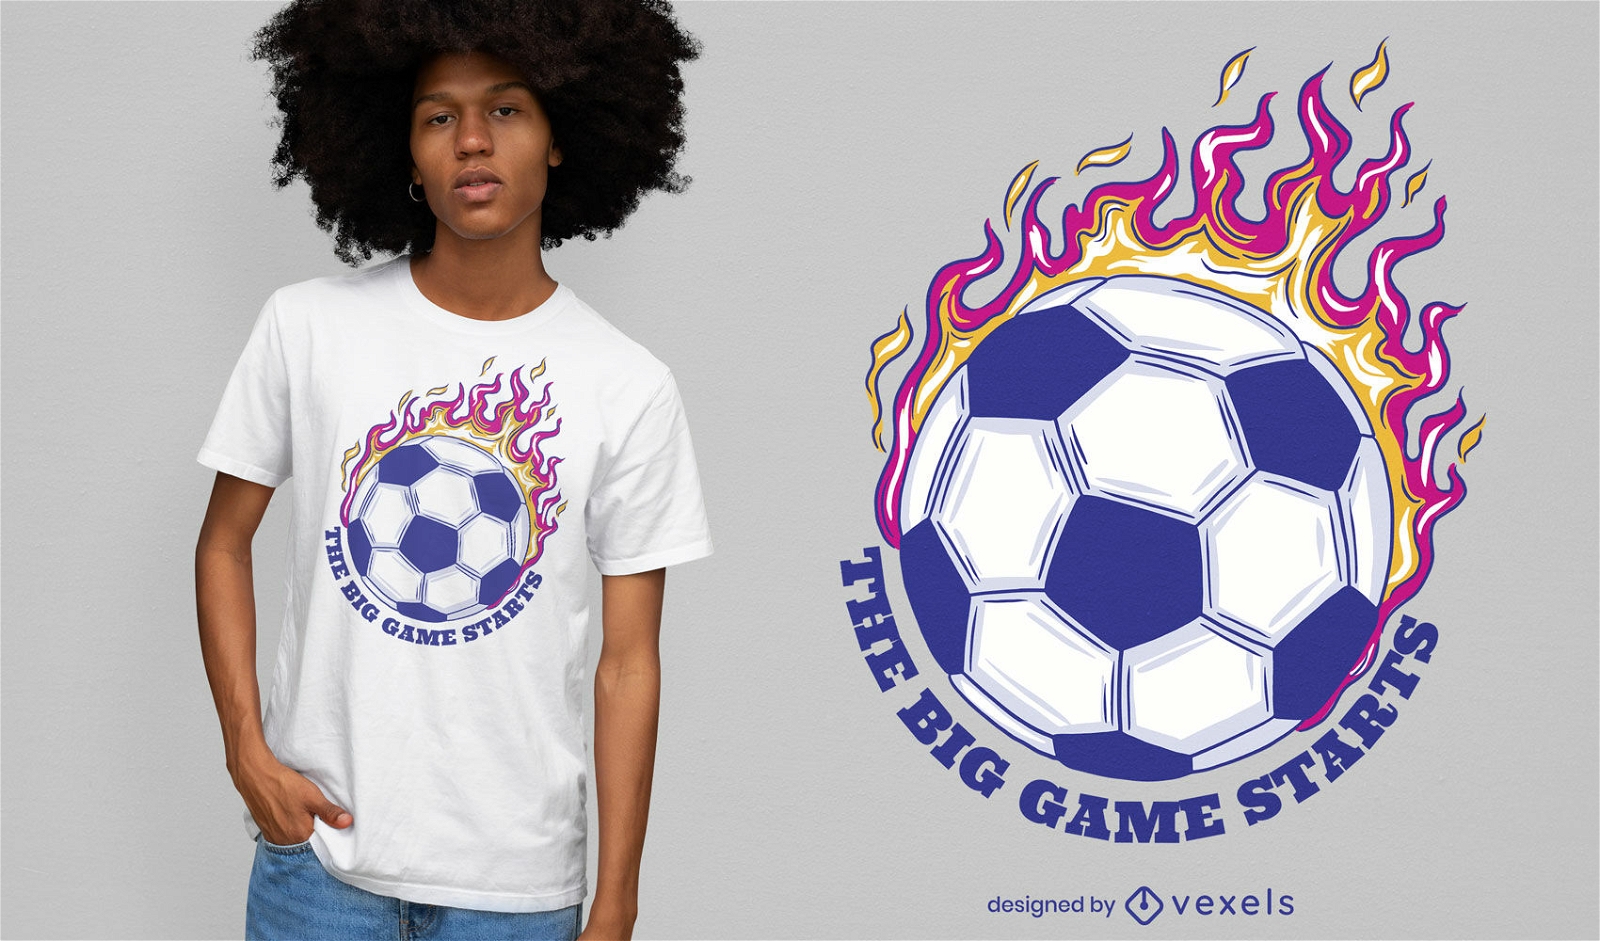 Awesome soccer ball on fire quote t-shirt design